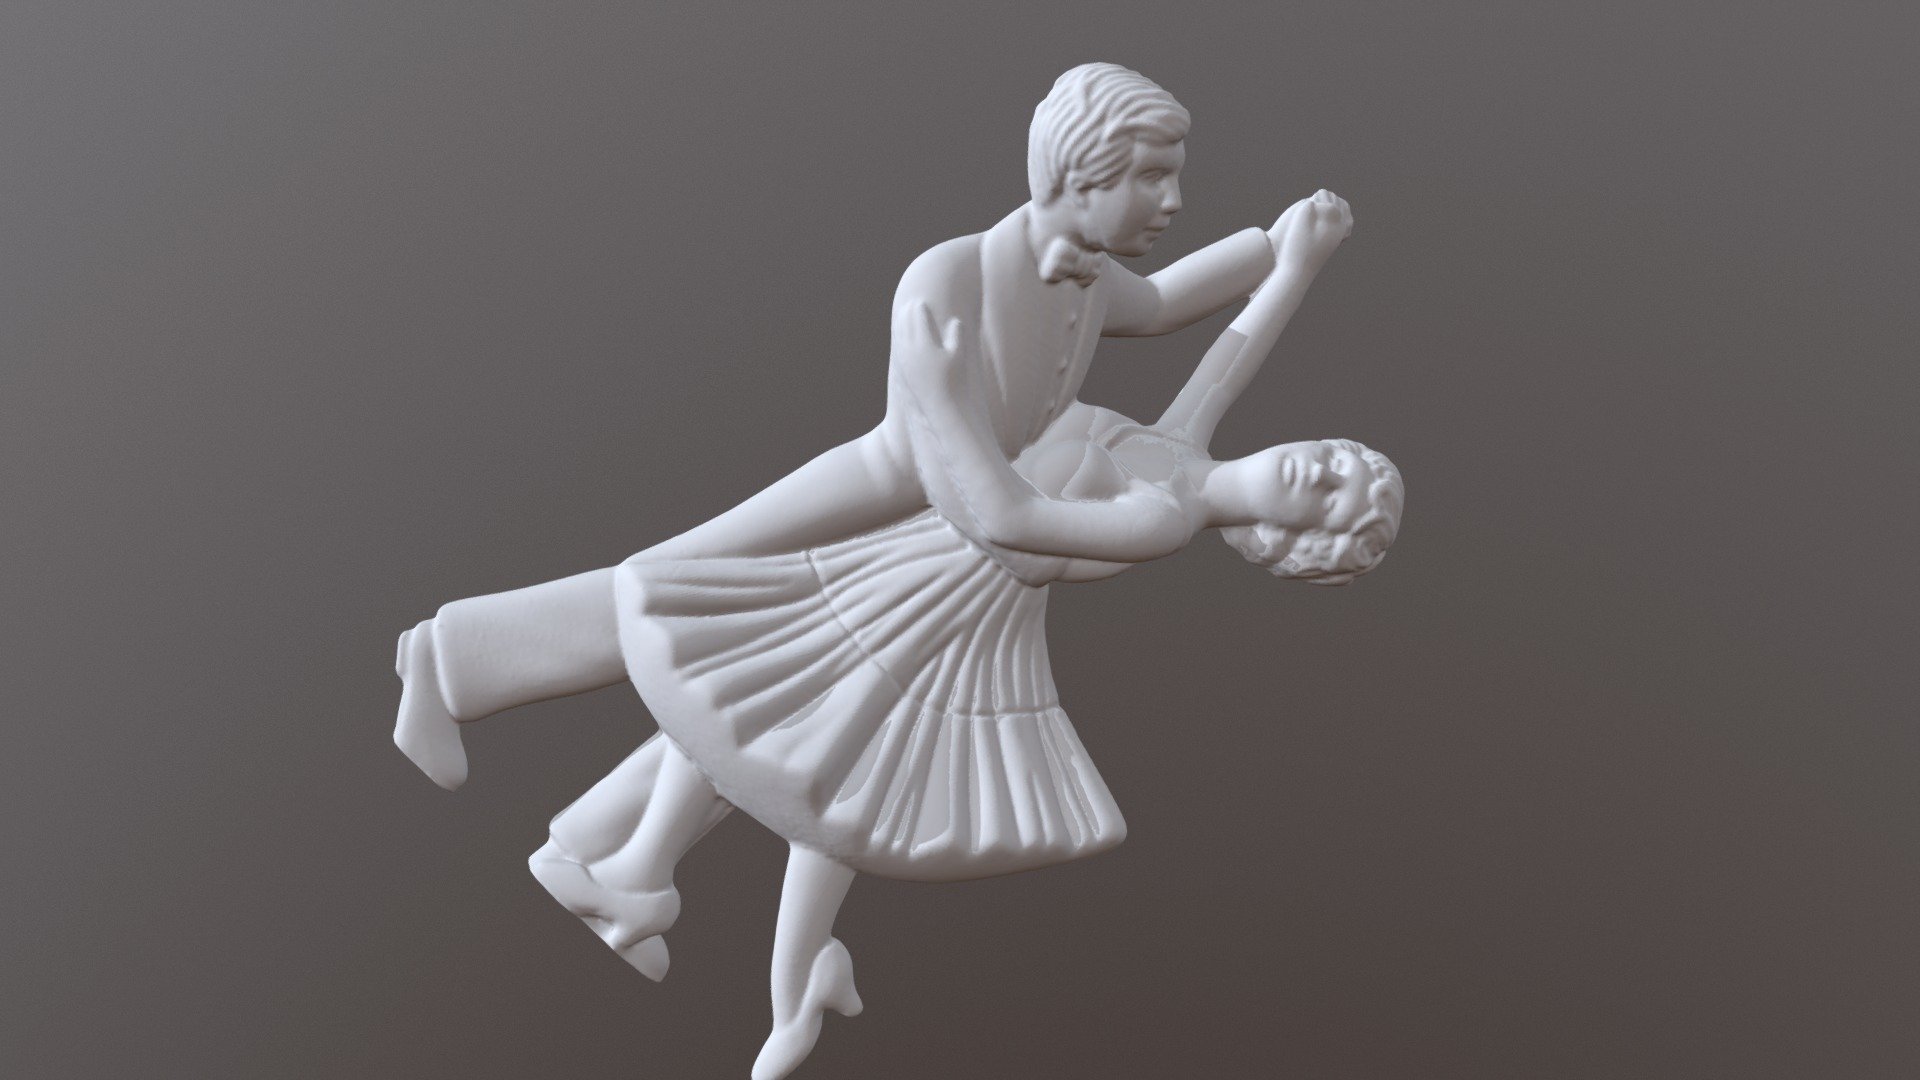 3D scanned dancing couple figurine